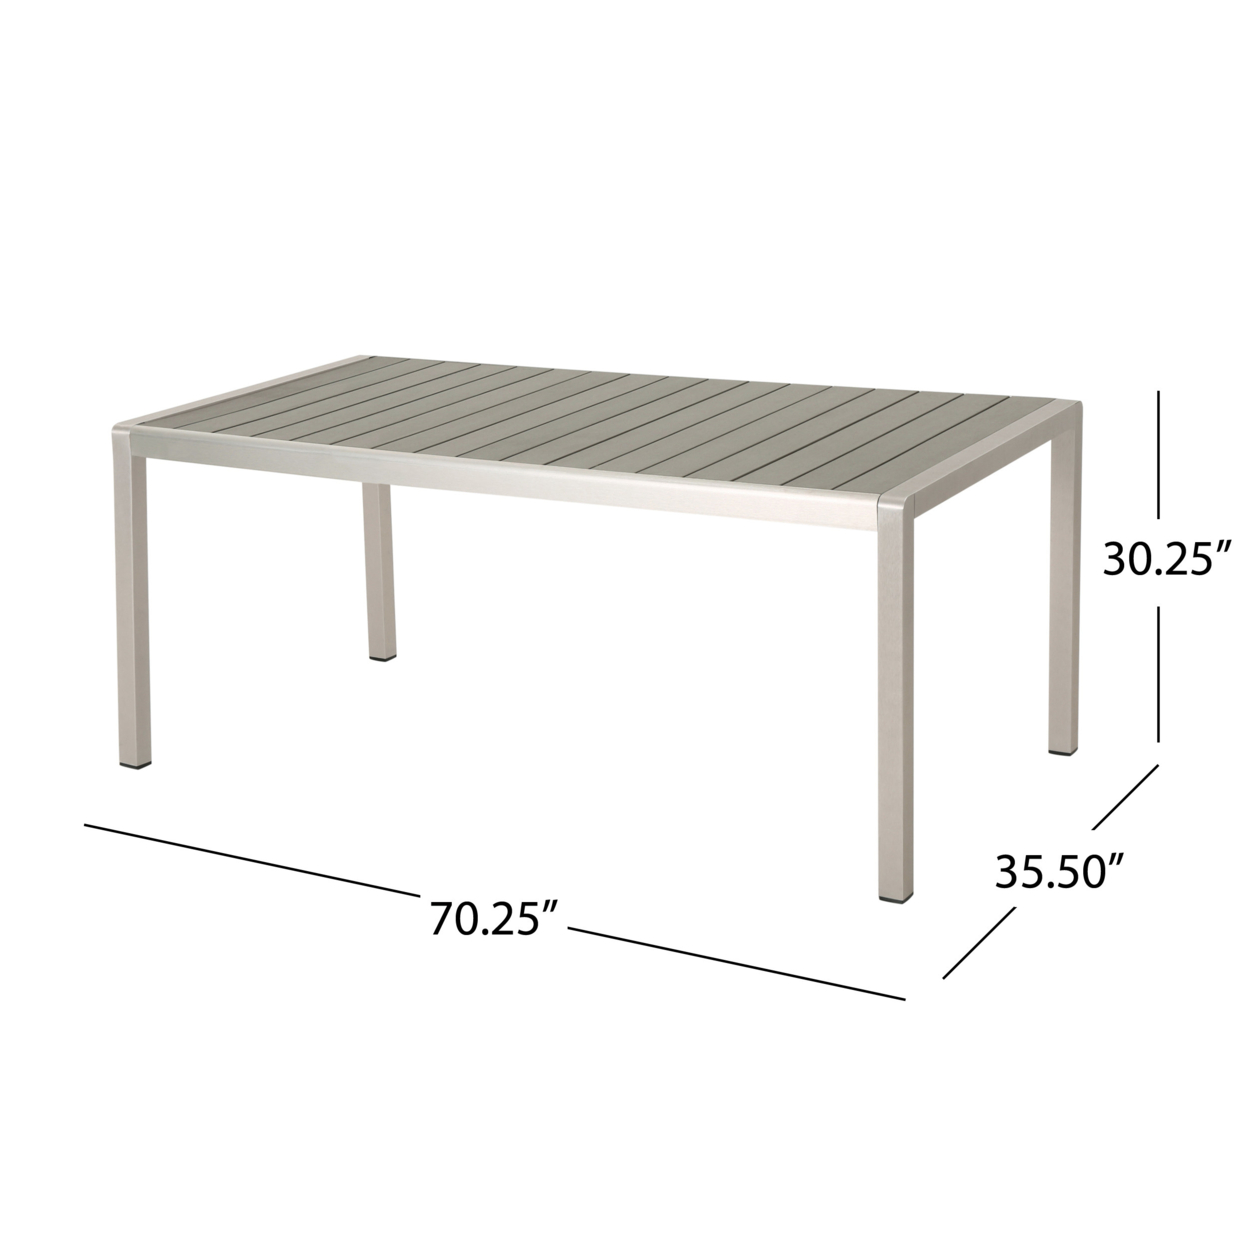 Thali Outdoor Modern 6 Seater Aluminum Dining Set With Faux Wood Table Top